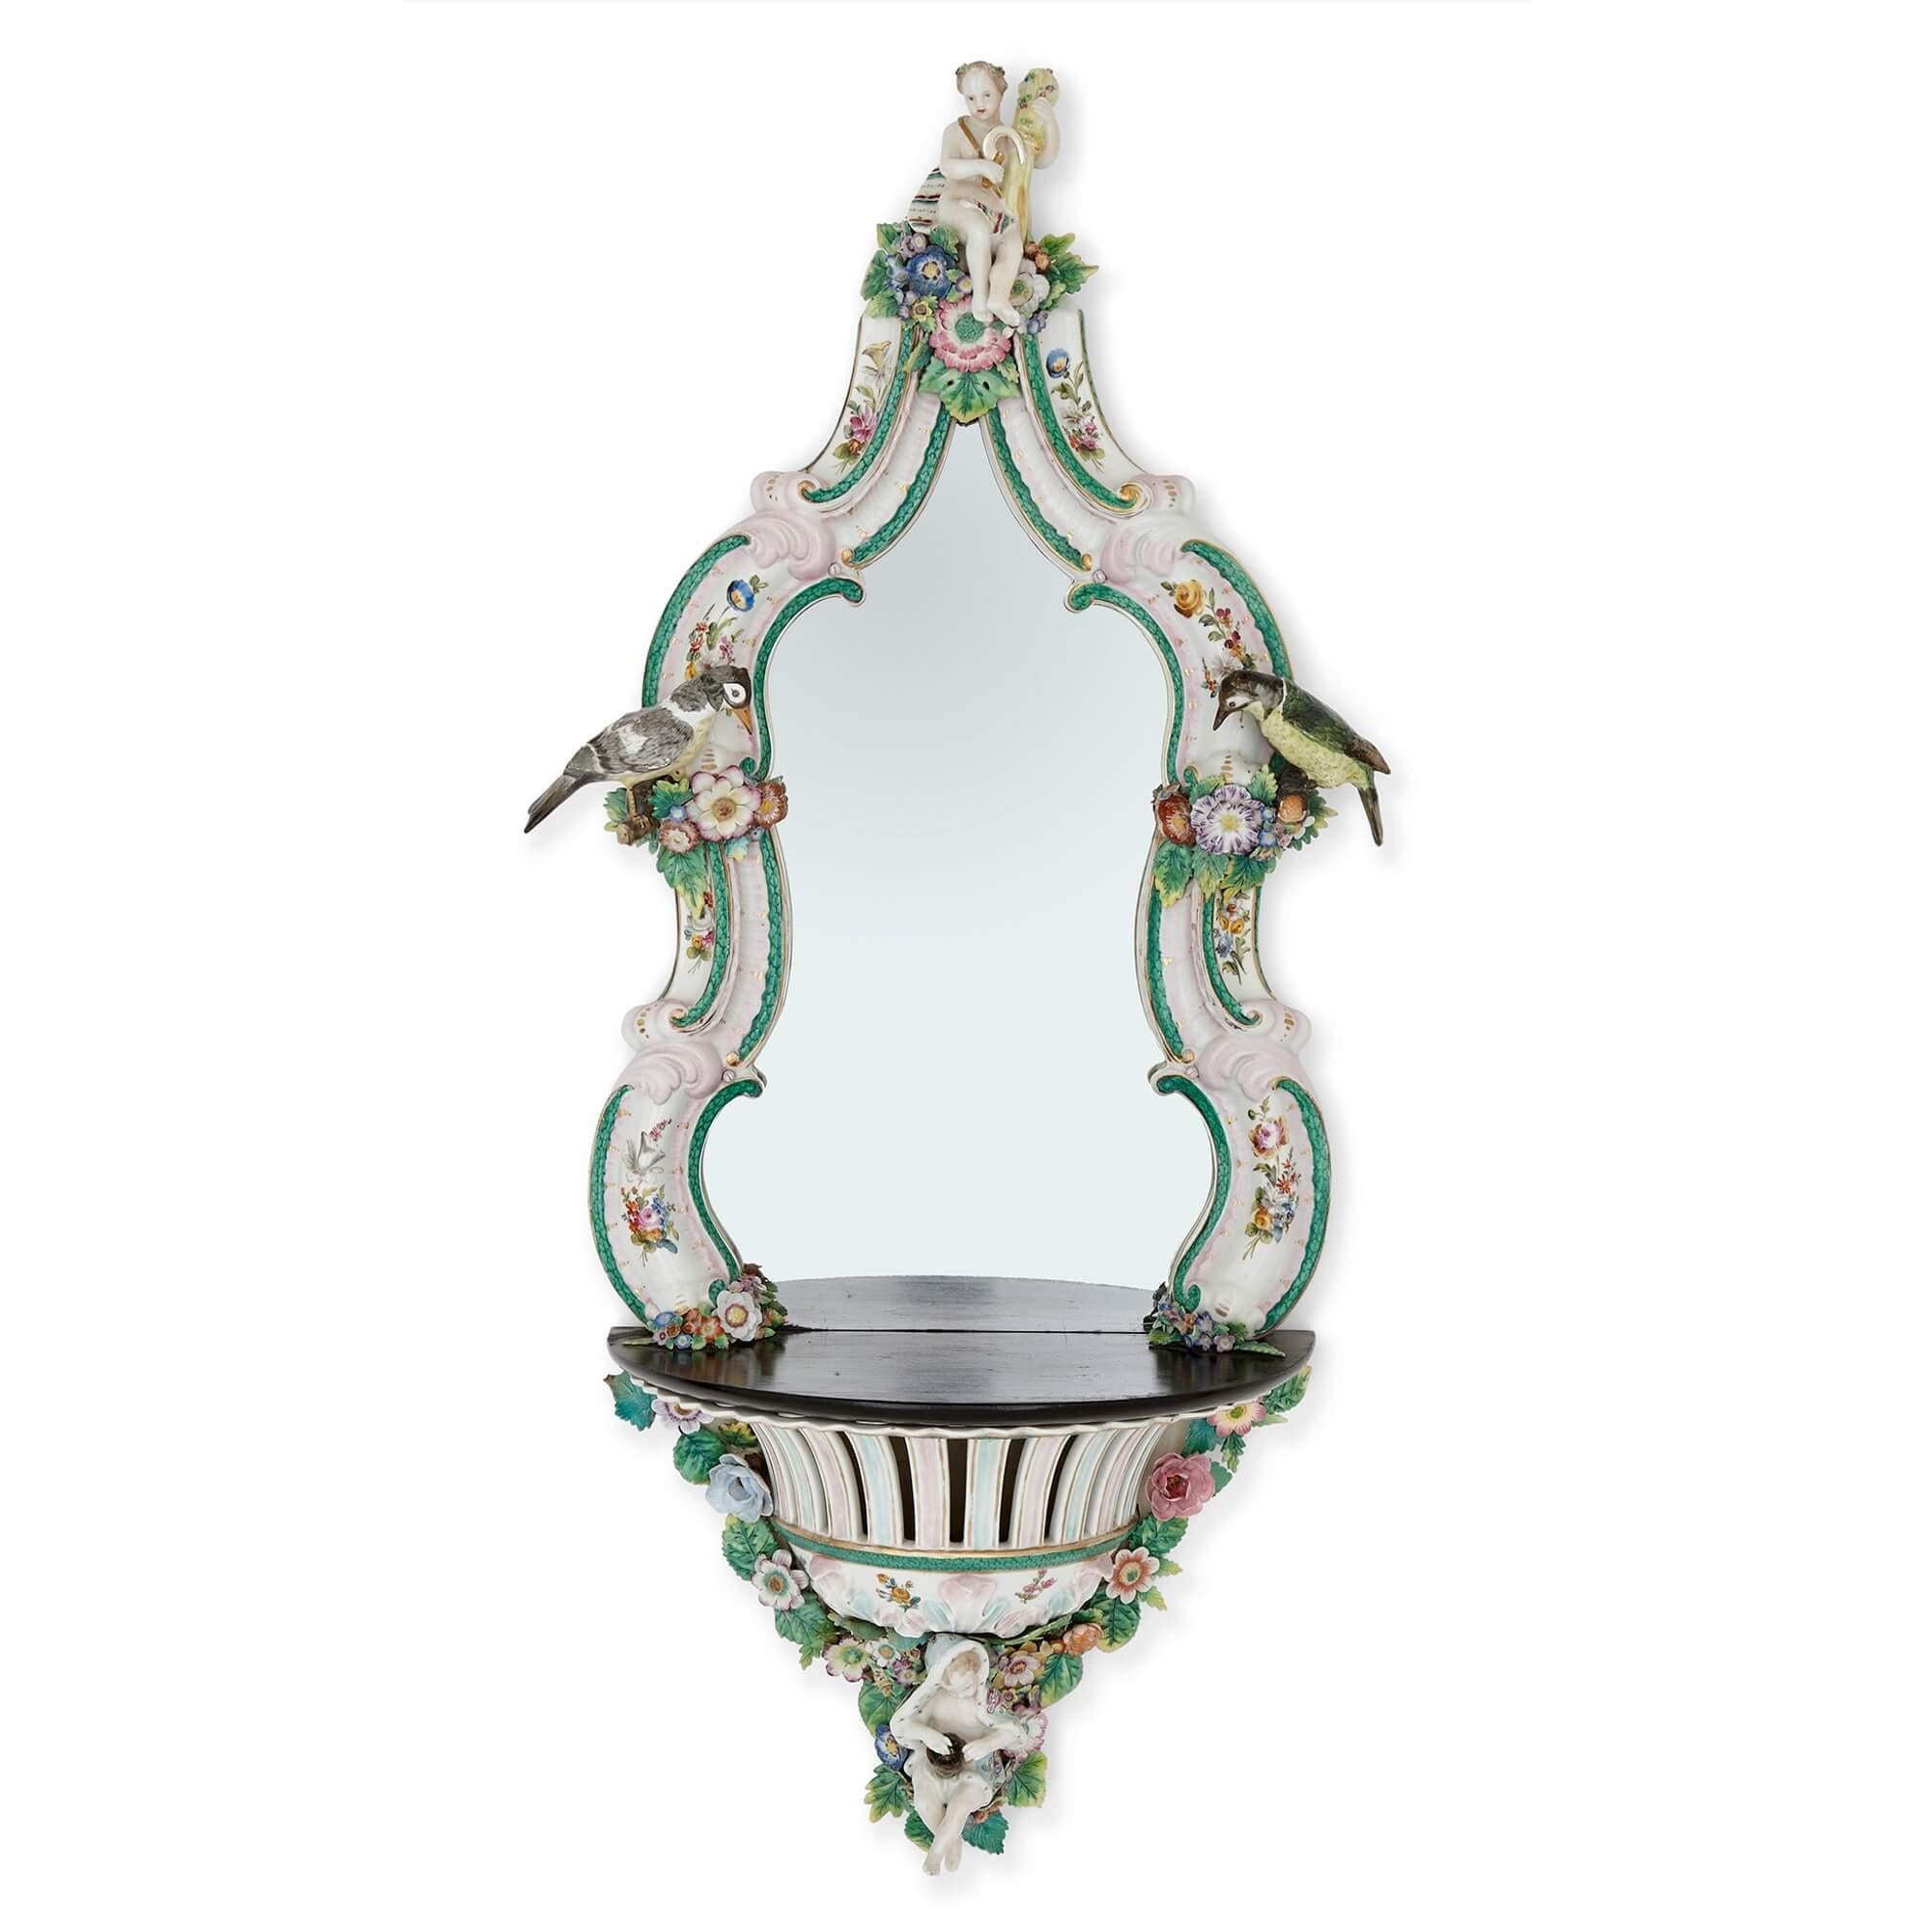 Pair of Meissen style porcelain and ebonised wood mirrored wall brackets
German, late 19th Century 
Height 88cm, width 36/40cm, depth 19cm

This superb pair of wall brackets are a masterclass in the Meissen design style. 

The mirror of each bracket